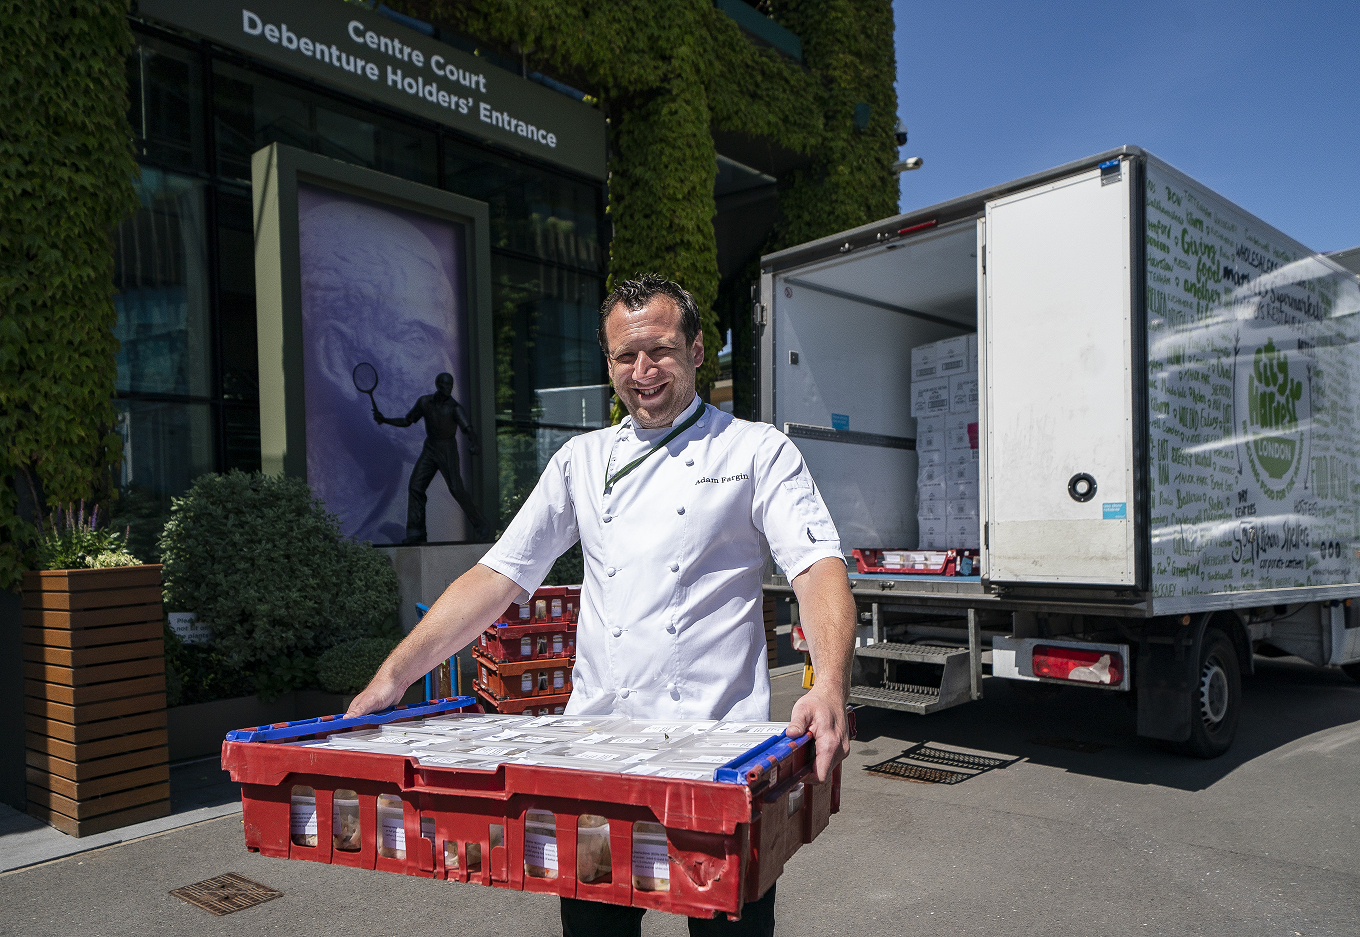 The AELTC has prepared hot meals to help vulnerable people during the pandemic ©AELTC/Bob Martin